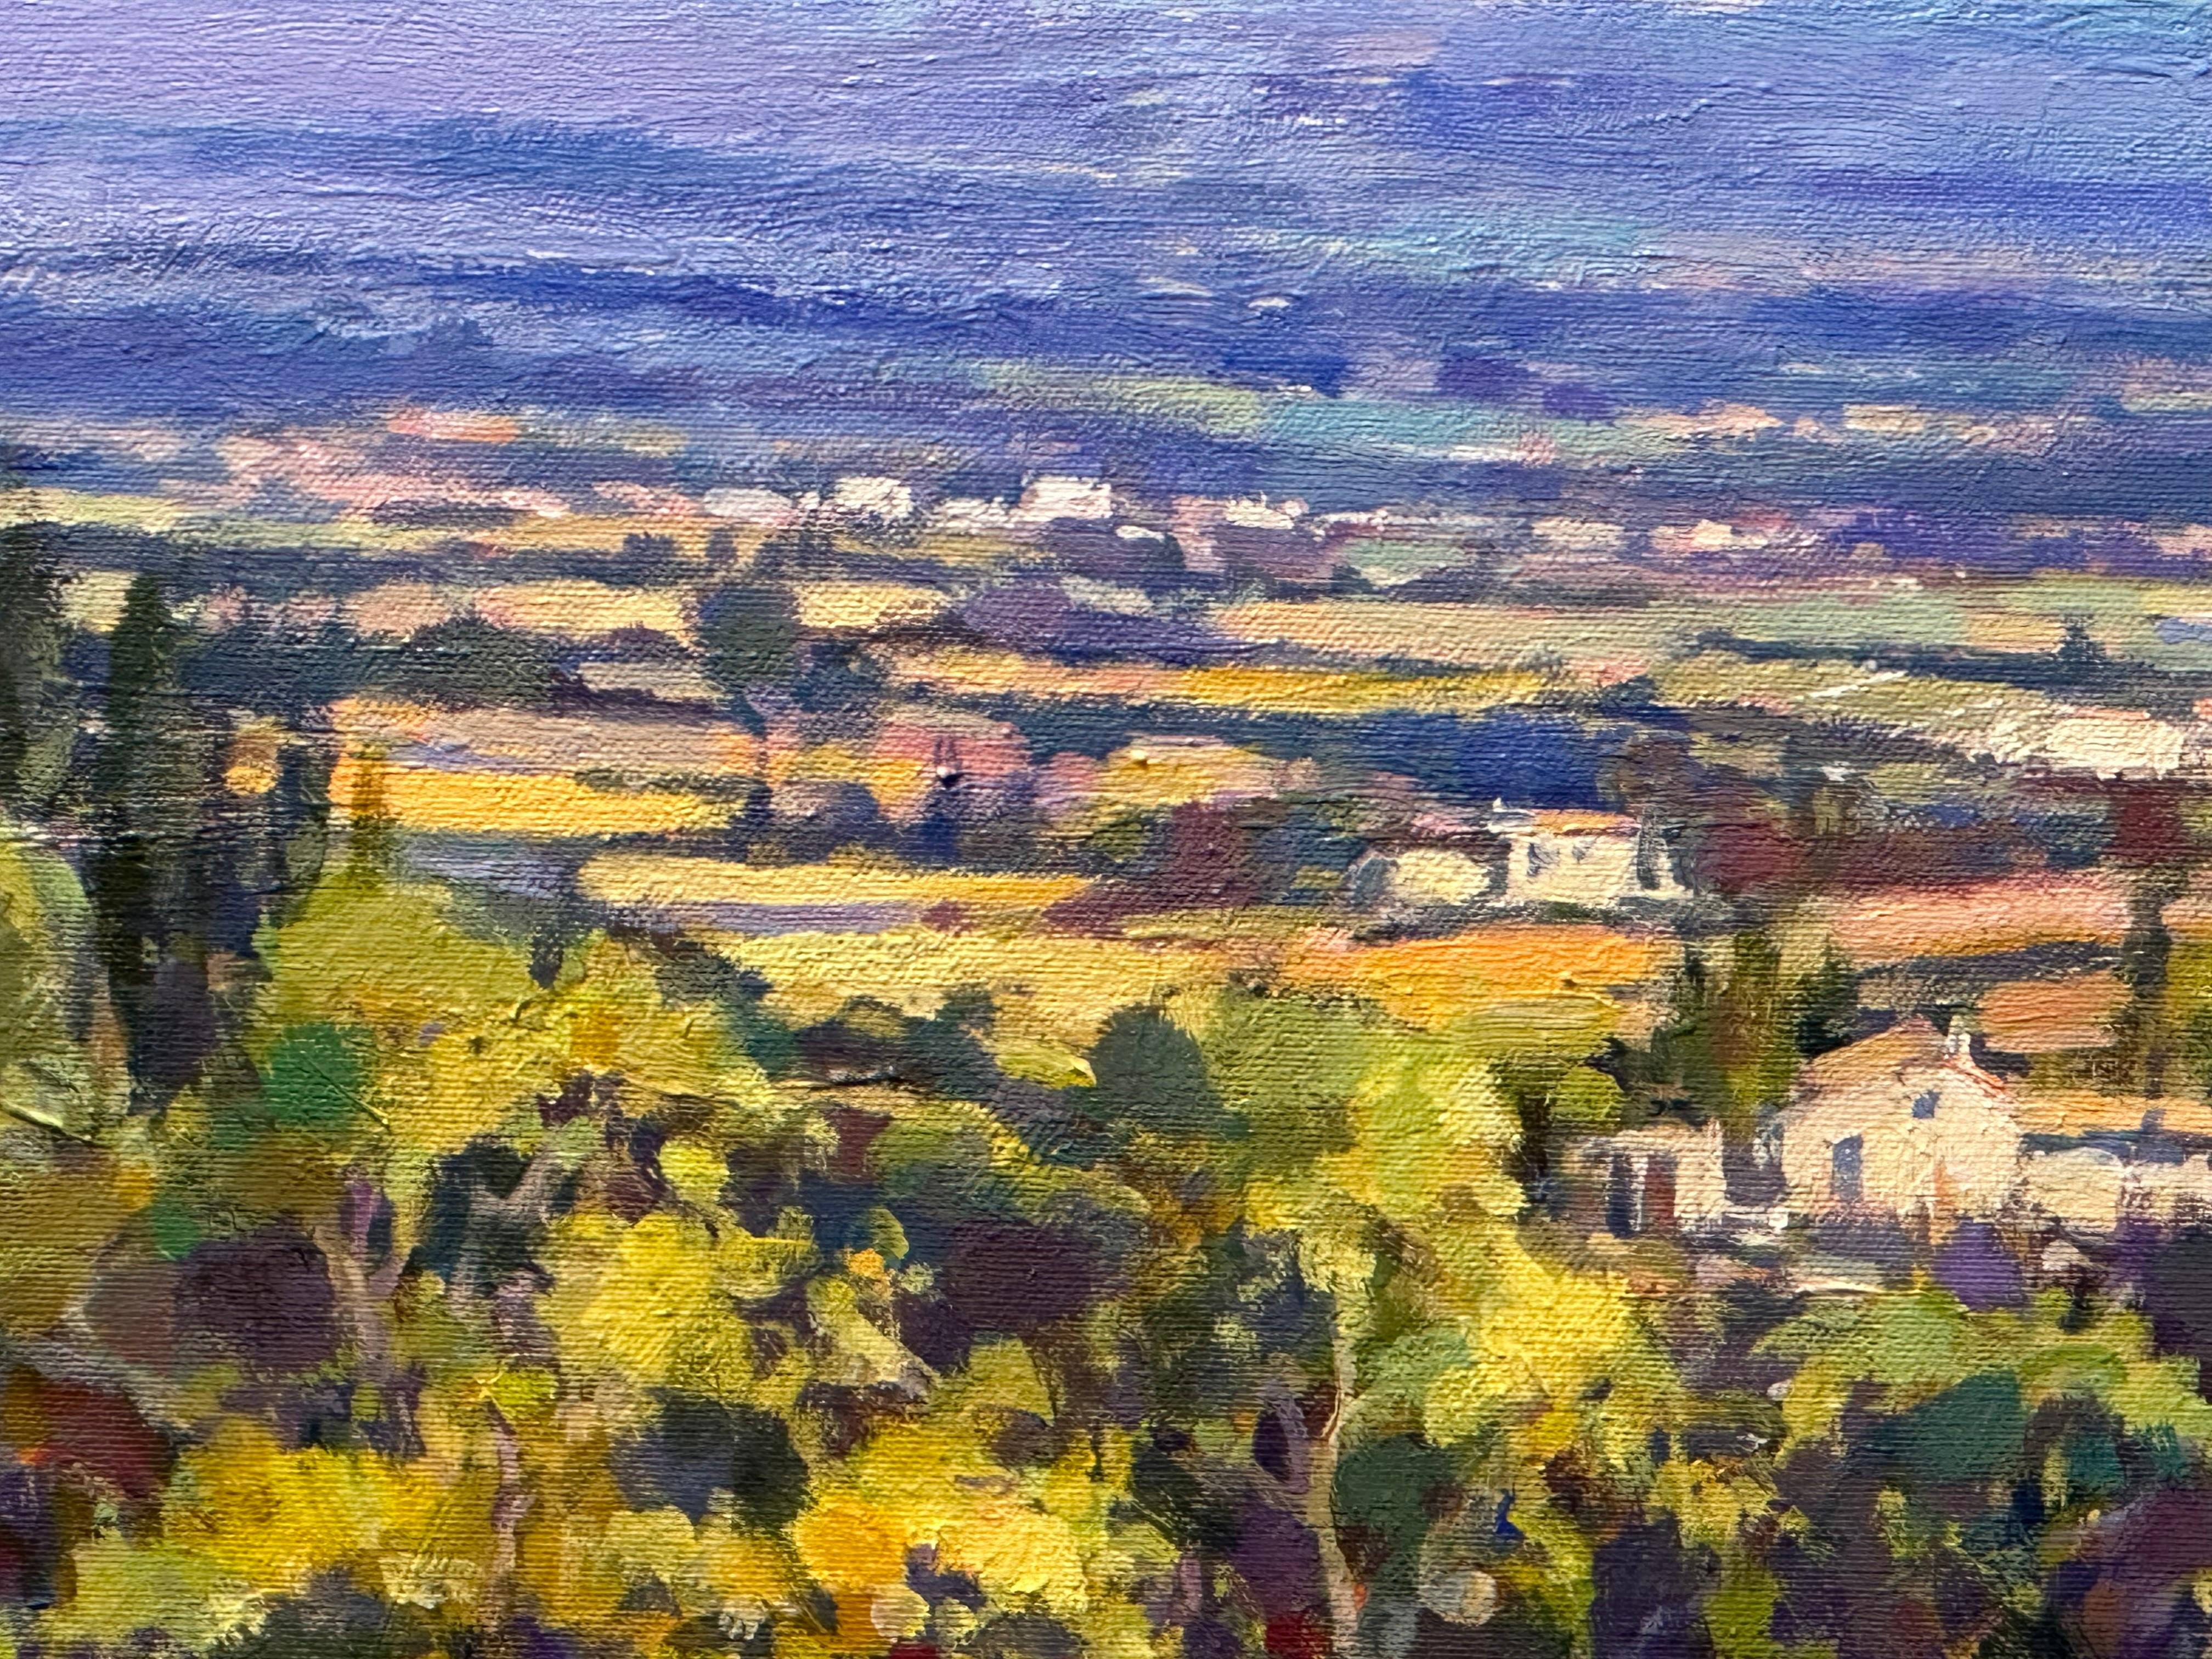 Jos Leurs
Plateau e Vaucluse Mont Ventoux
60 x 70 cm
acrylic on canvas
not framed, frame is possible.

Jos Leurs is a Dutch Impressionistic Plein Air Painter who lived in France for almost 30 years. Since 2011 he lives in Holland again. His work is